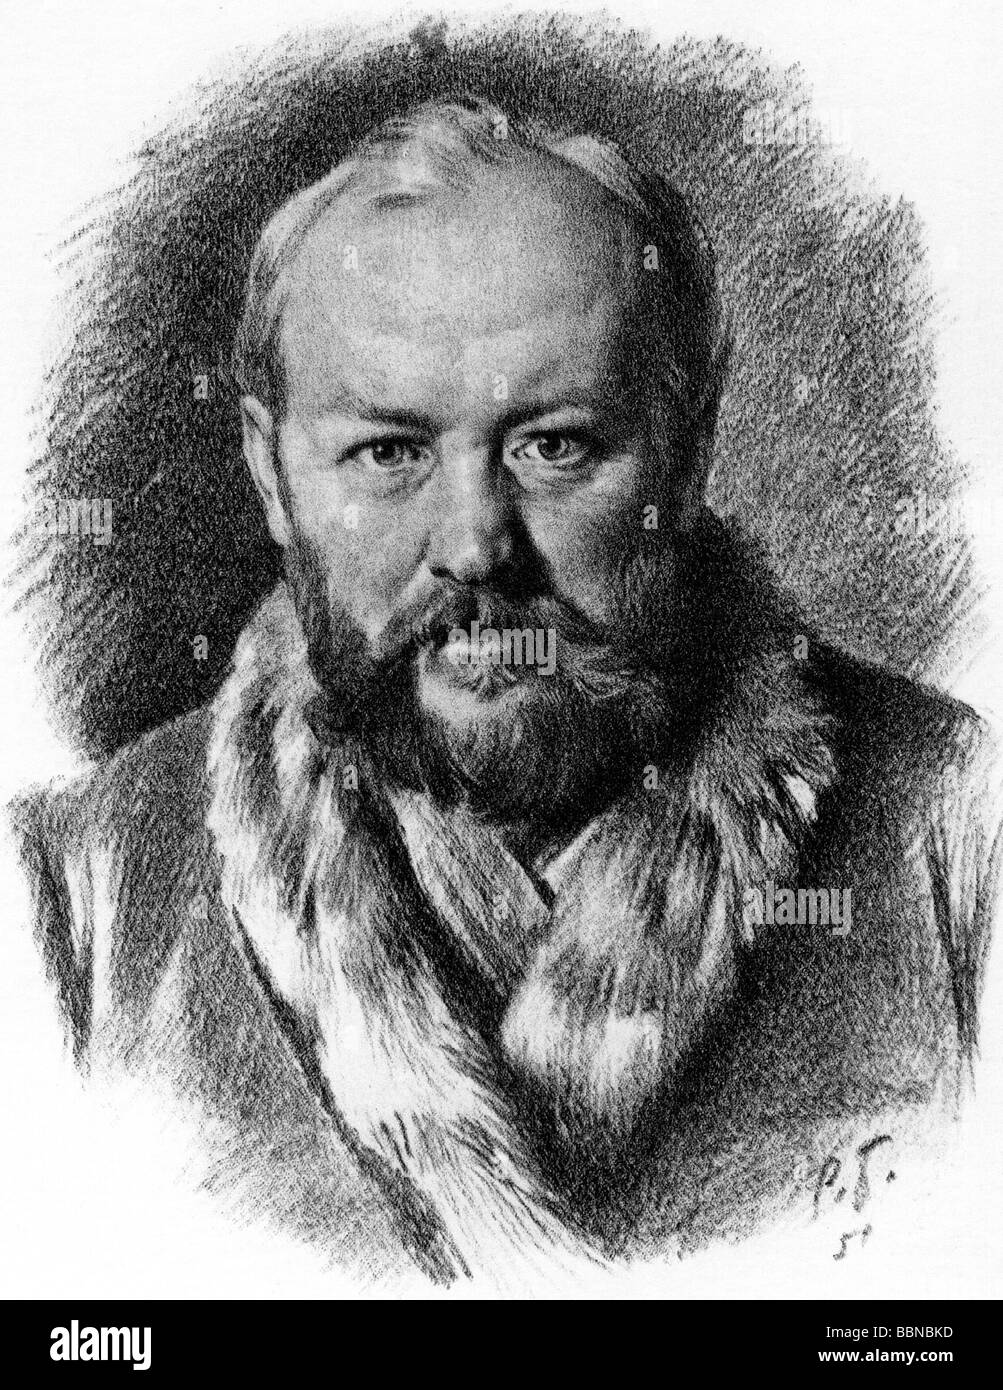 Ostrovsky, Alexandr, 31.3.(12.4.)1823 - 2.(14.)6.1886, Russian author / writer, portrait, etching, Stock Photo